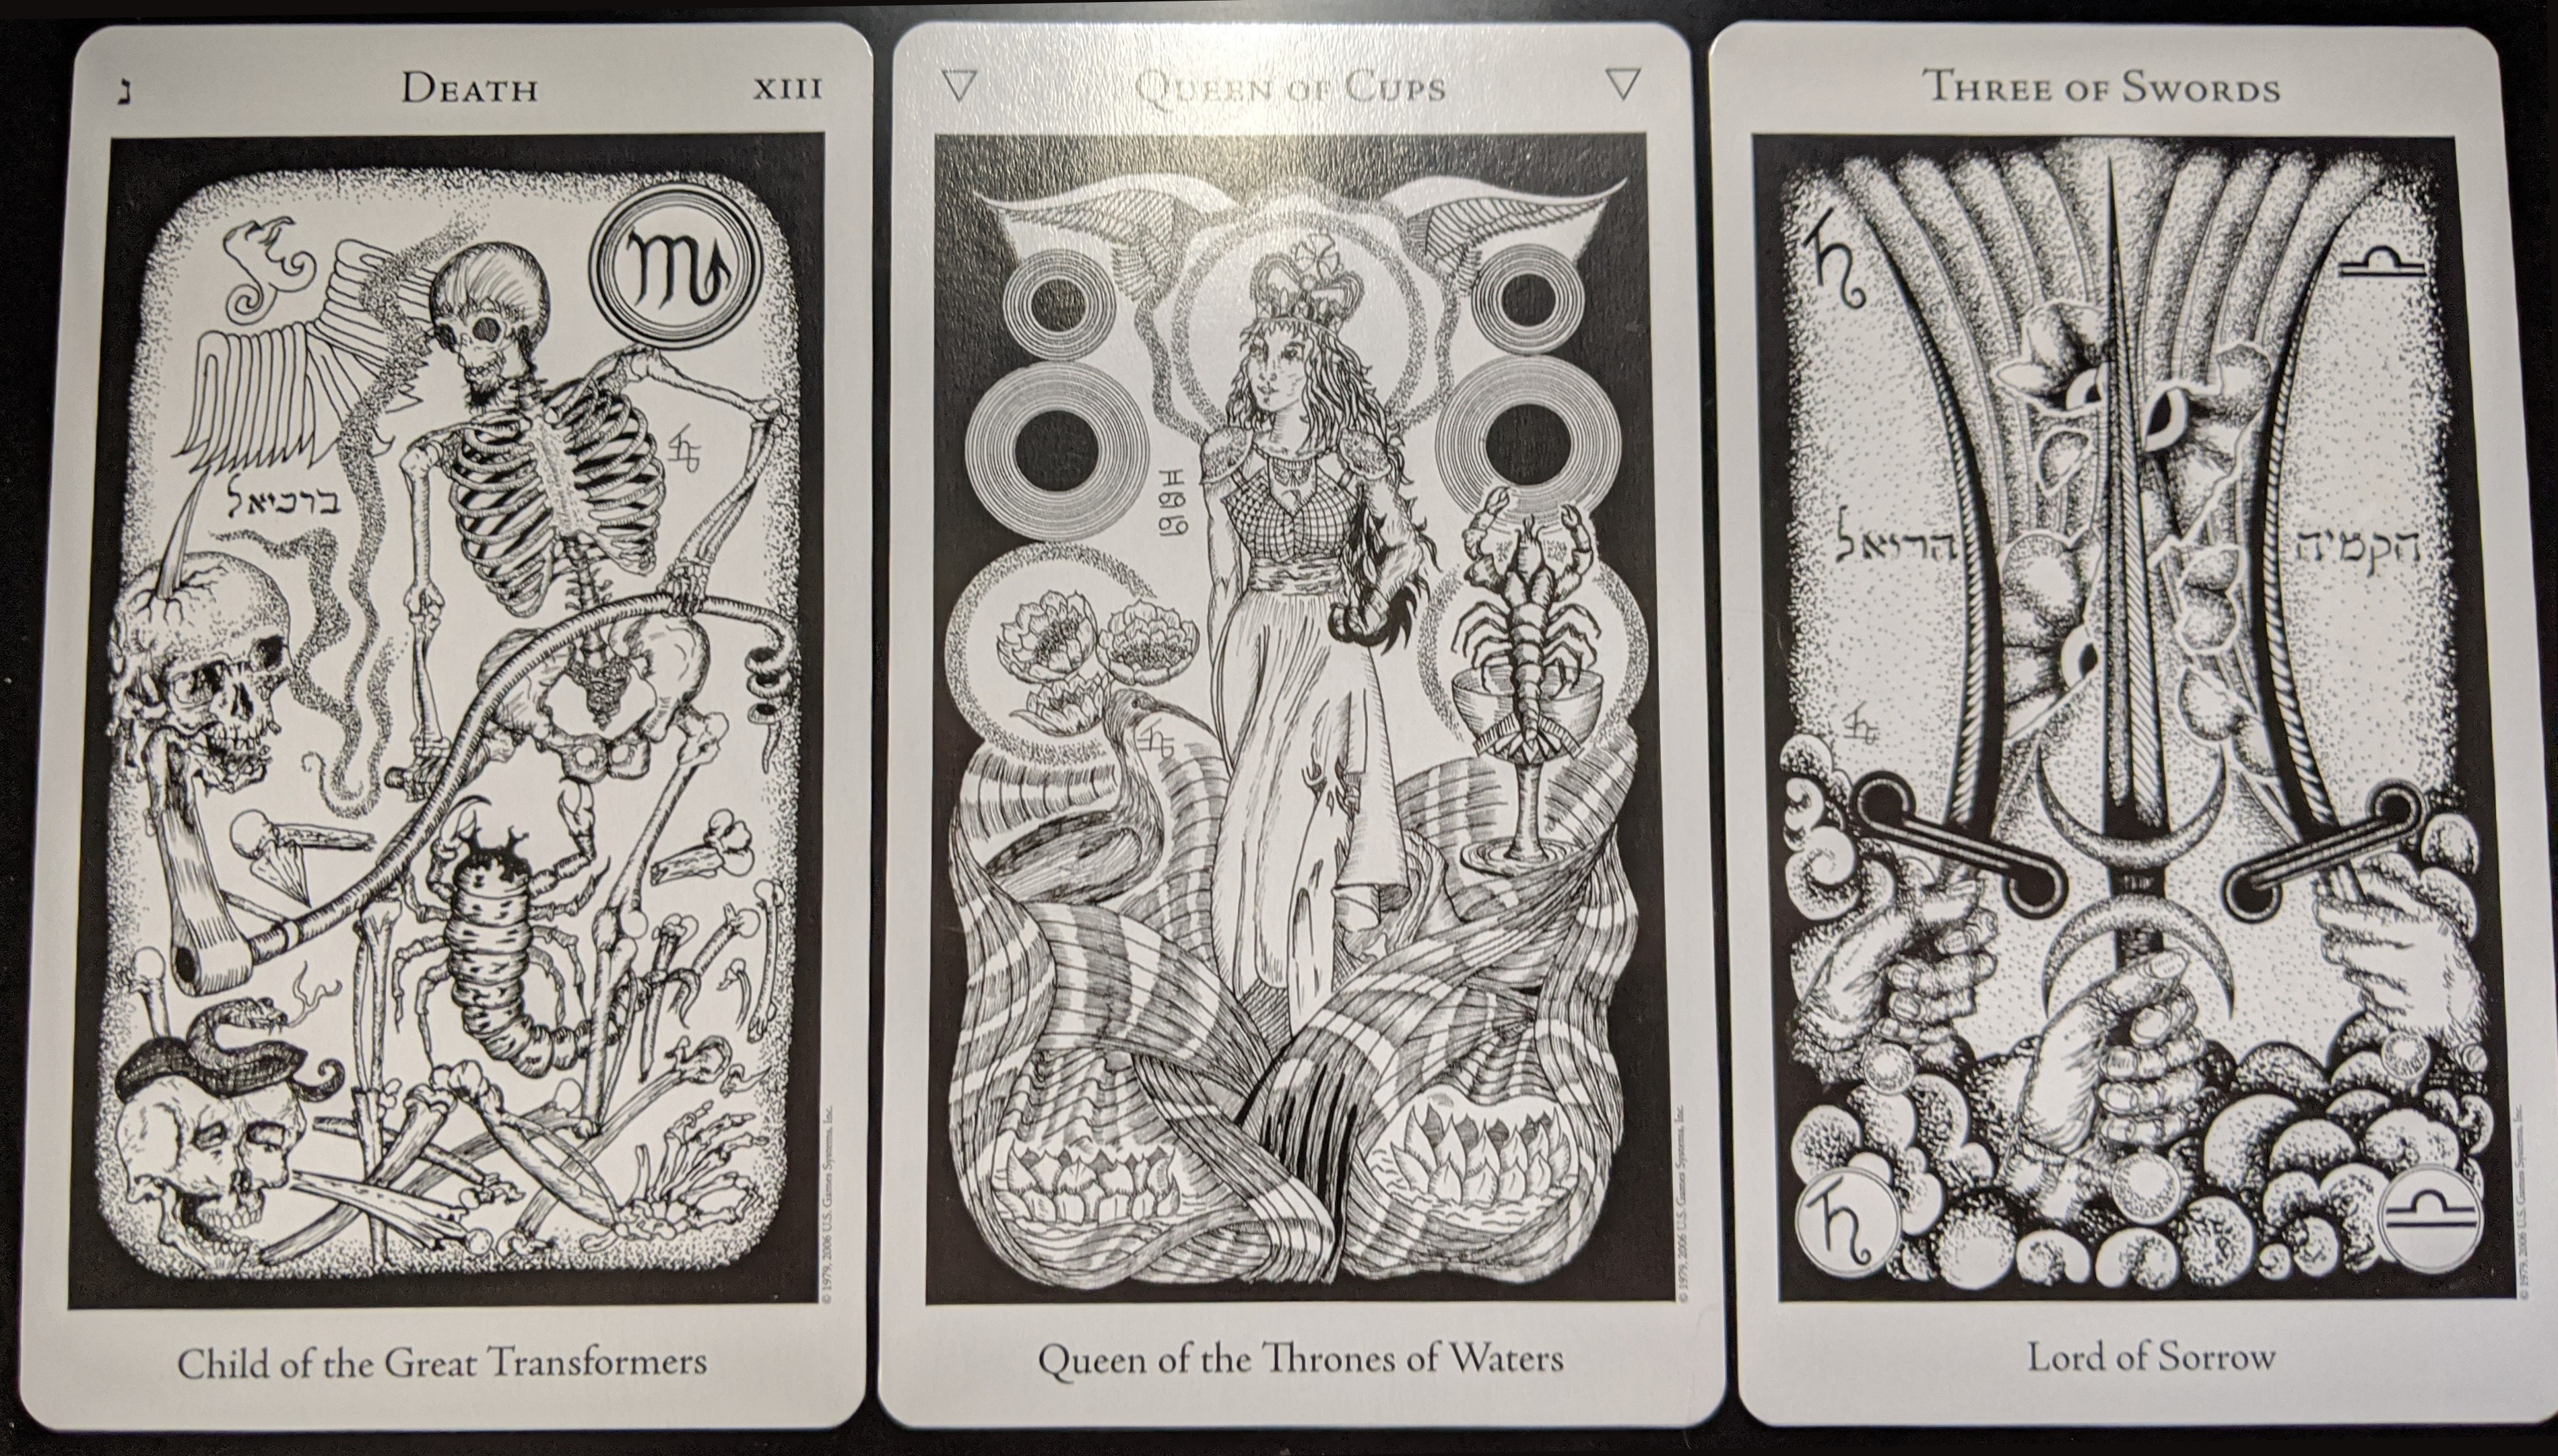 [Pictured: Death, the Queen of Cups, and the Three of Swords from the Hermetic Tarot.]